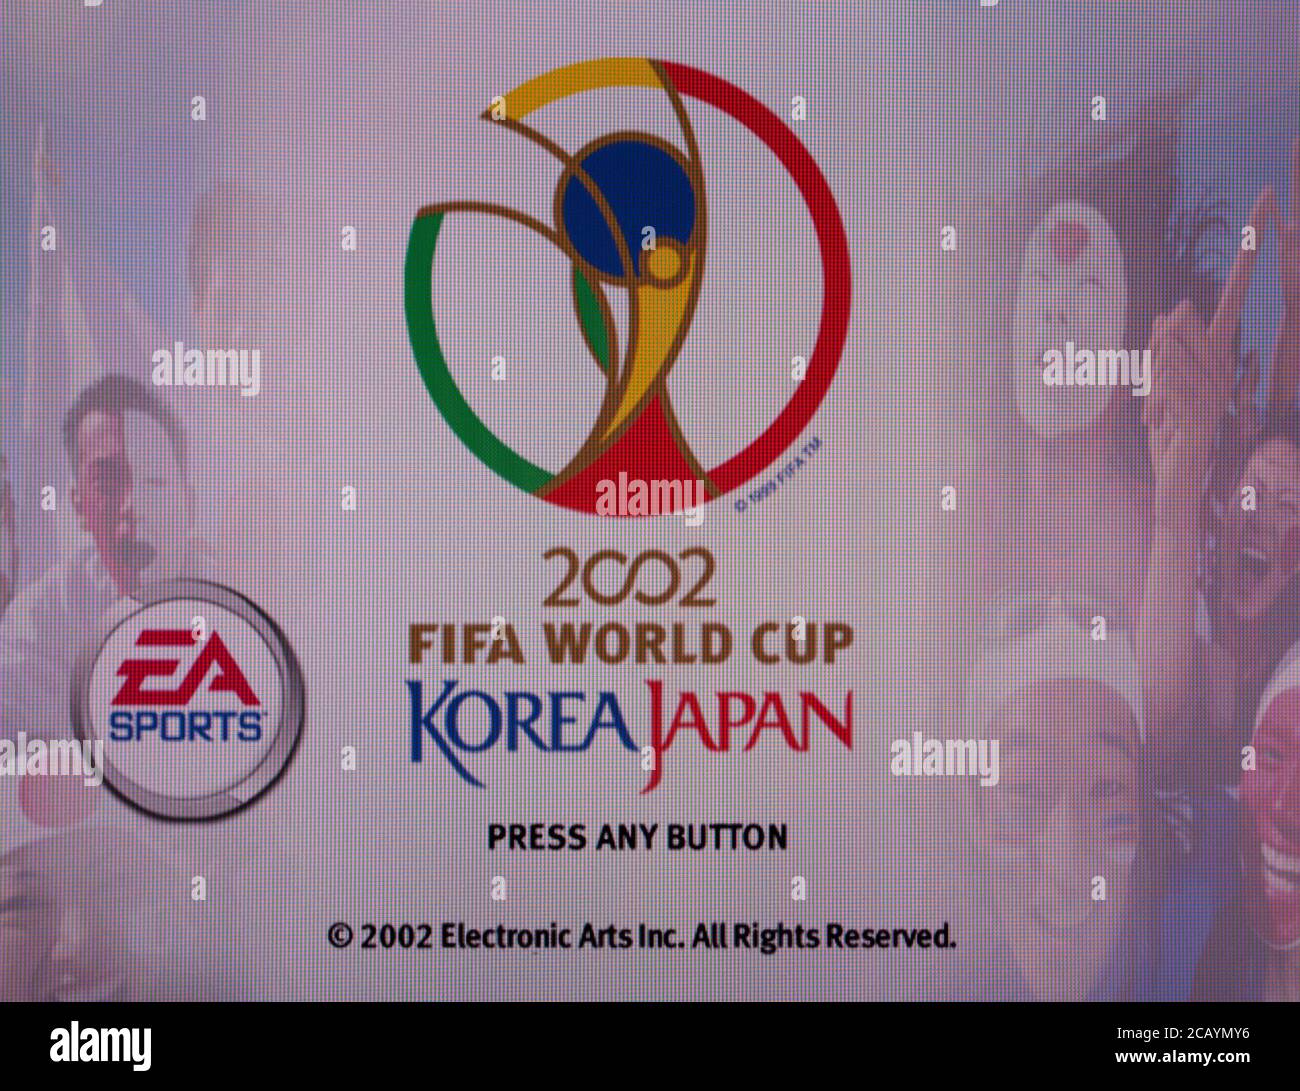 Fifa World Cup 02 Korea Japan High Resolution Stock Photography And Images Alamy